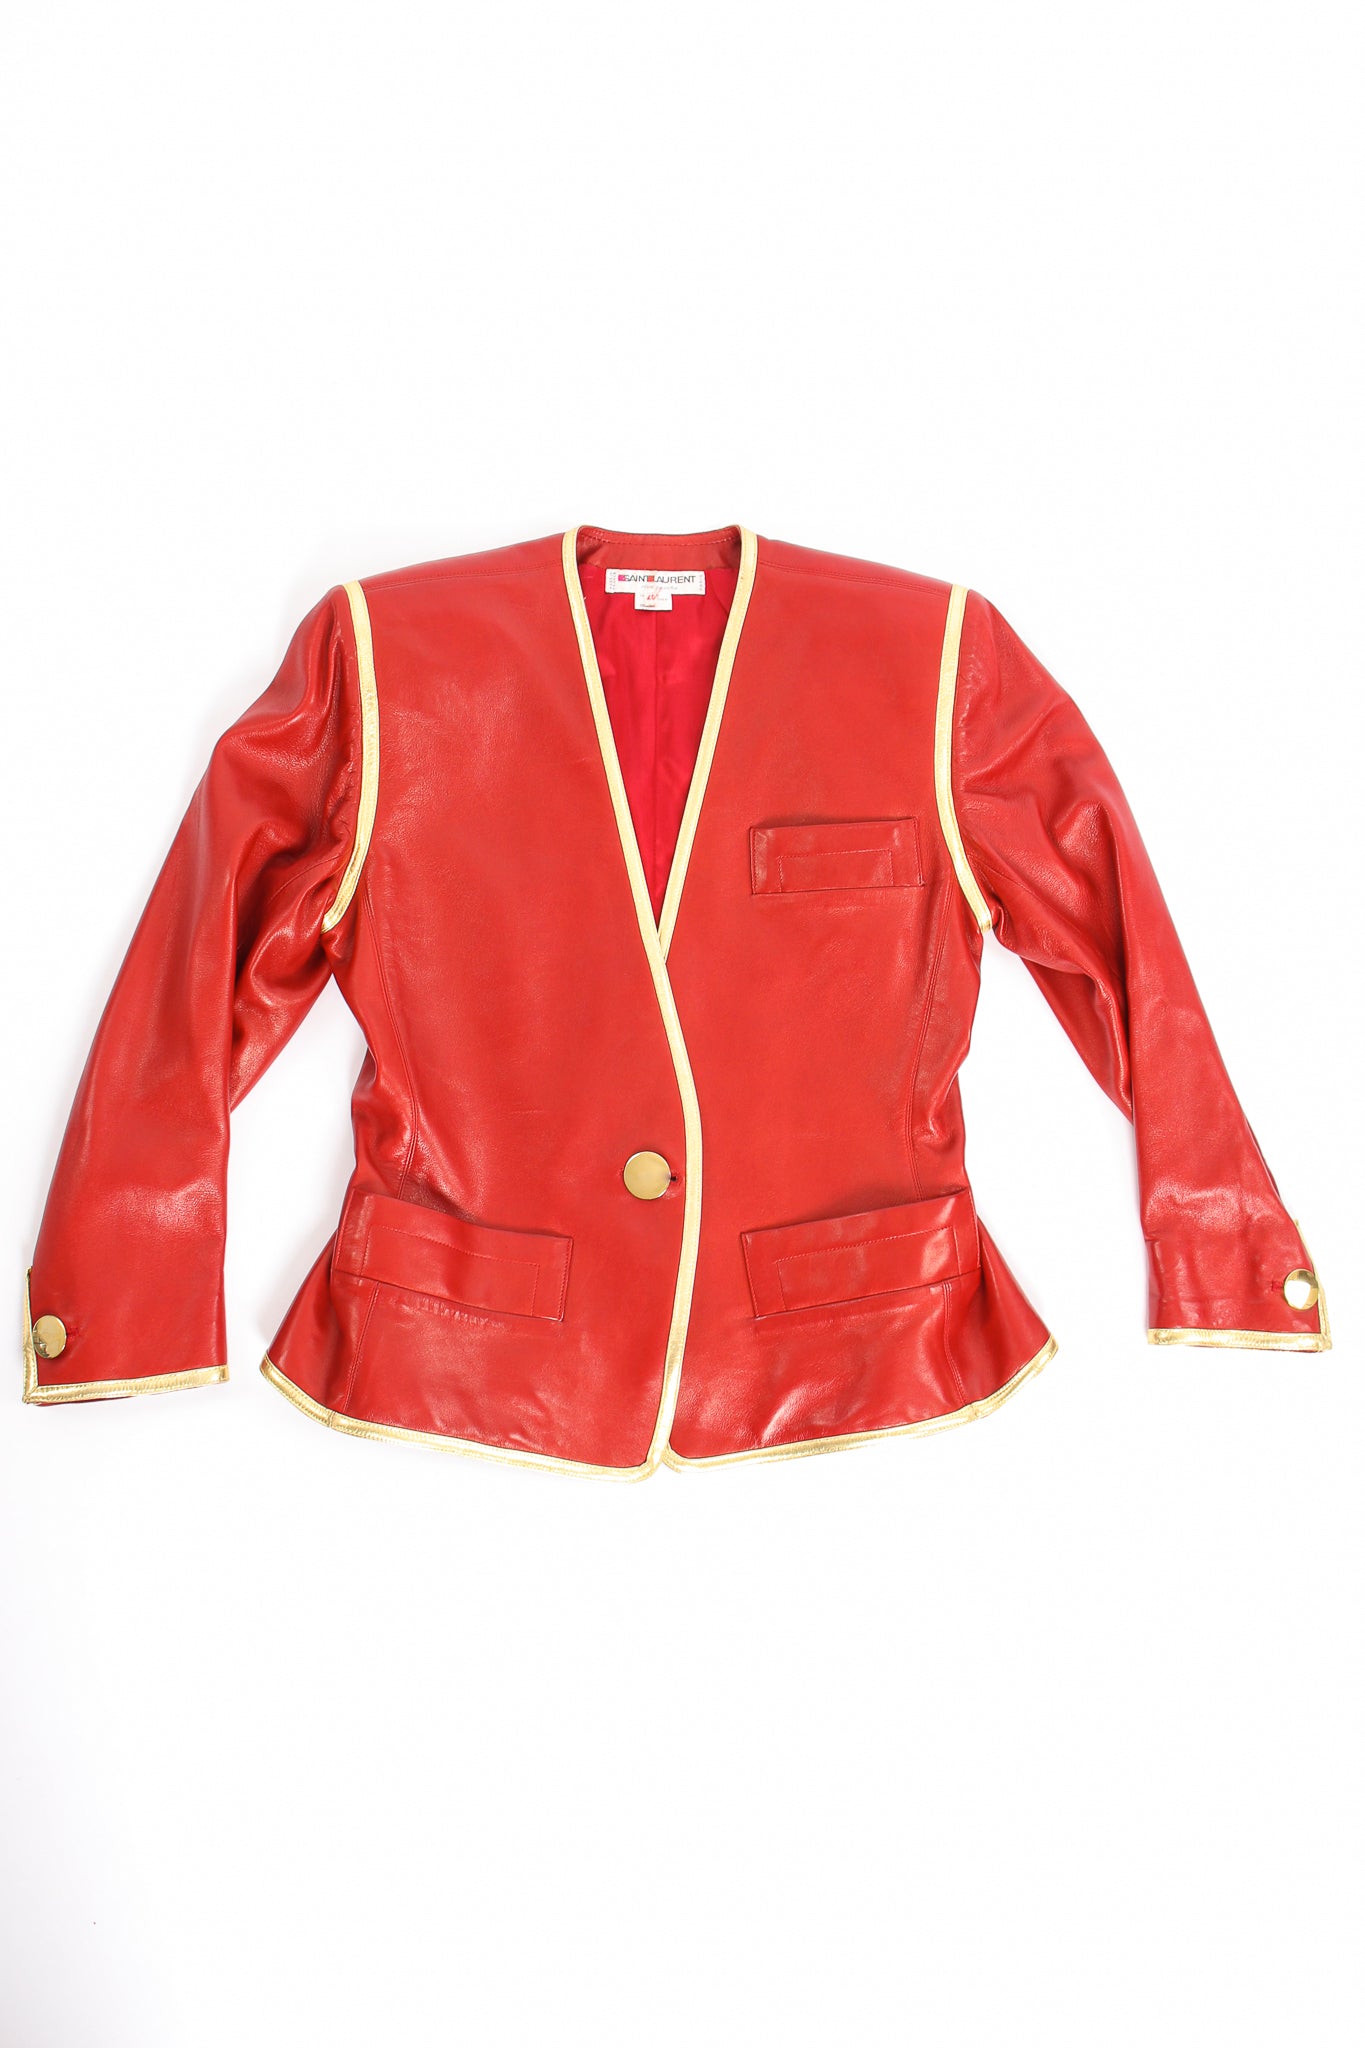 Vintage YSL Yves Saint Laurent 1988 Red Leather Skirt Suit Jacket flat at Recess Los Angeles